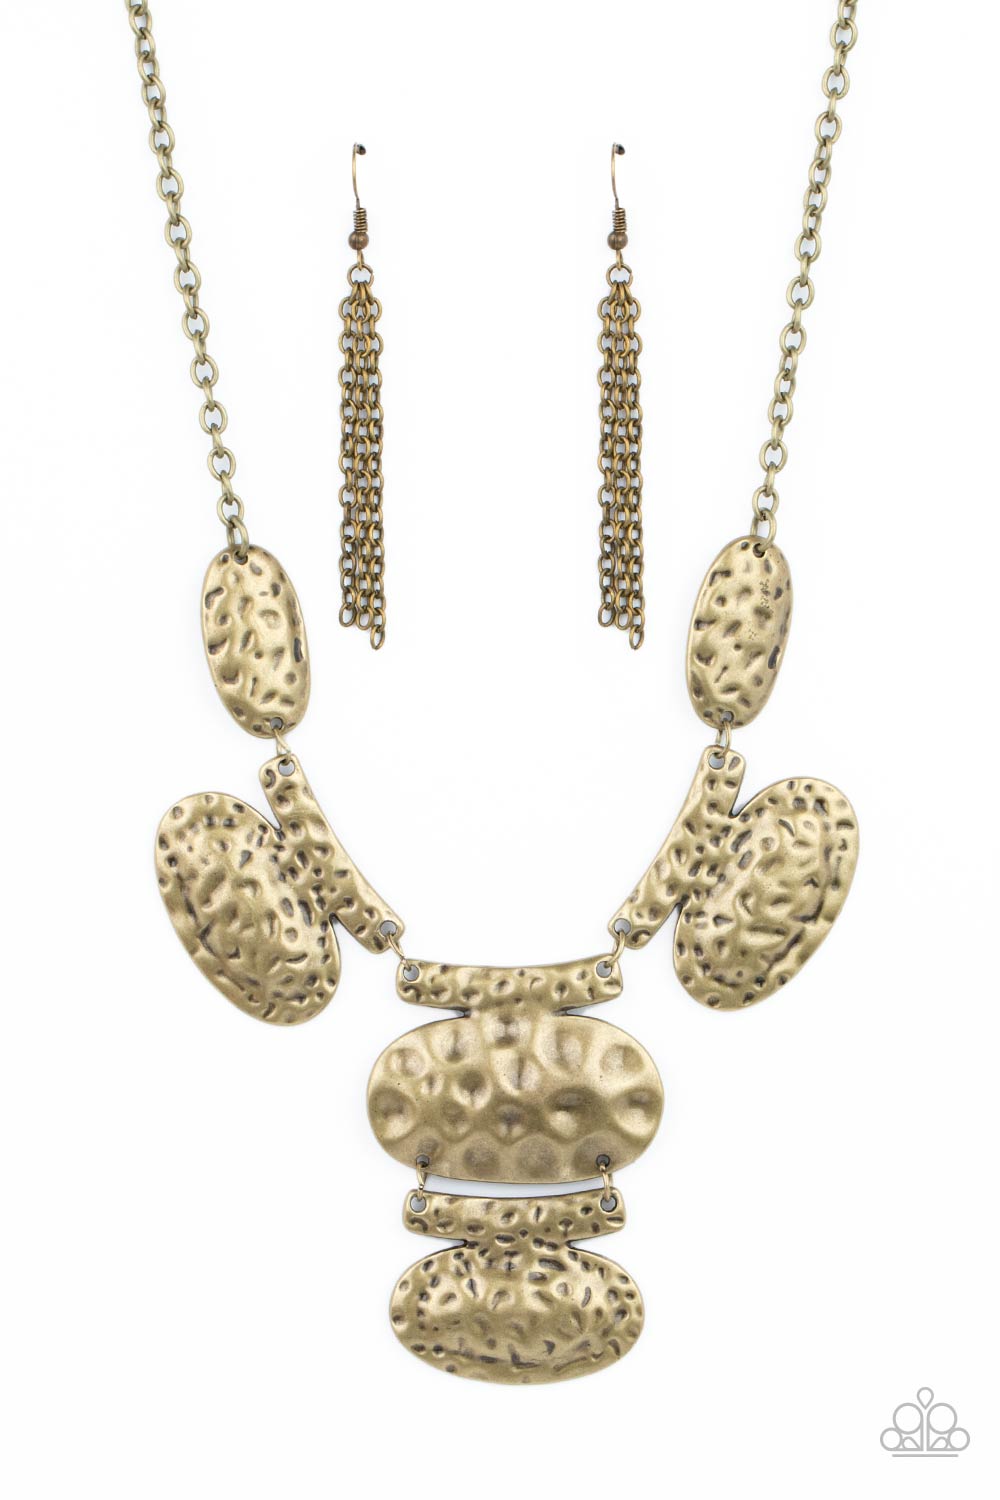 Gallery Relic Necklace - Brass